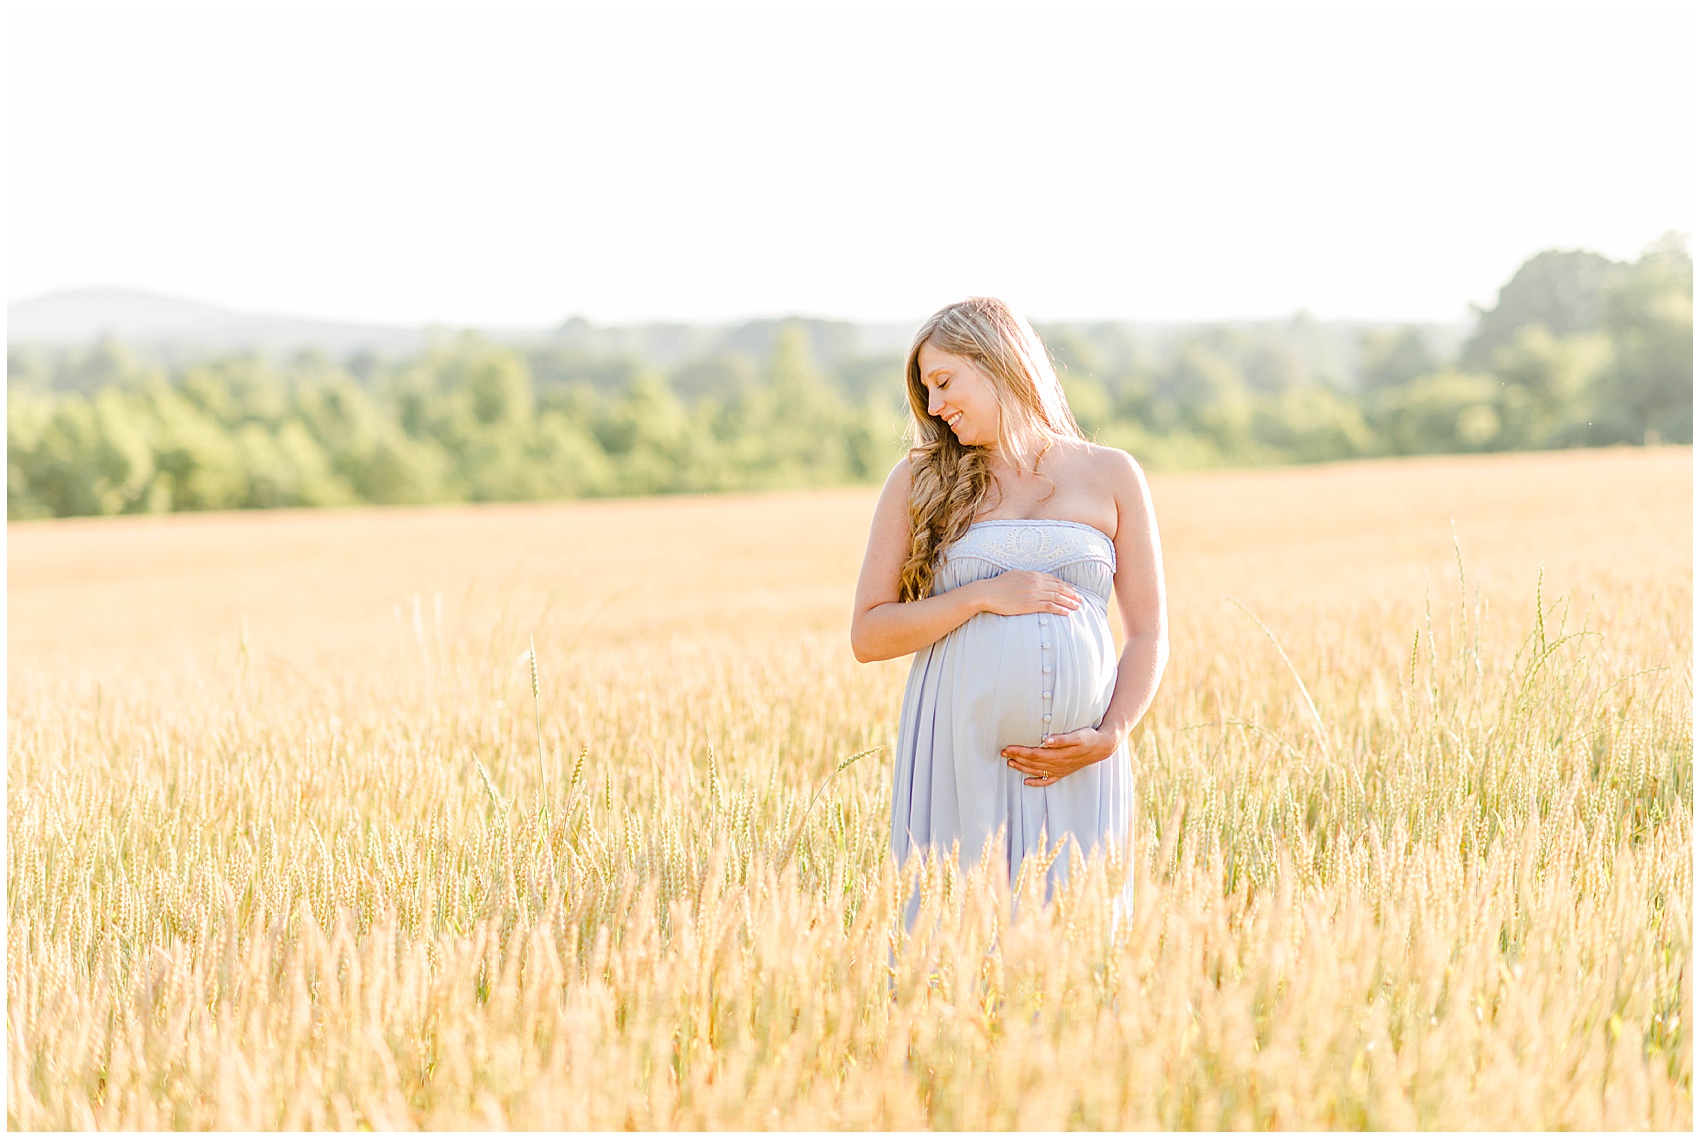 Harvest House and Catering Ramseur NC wheat field maternity session Charleston SC wedding Photographer_0247.jpg